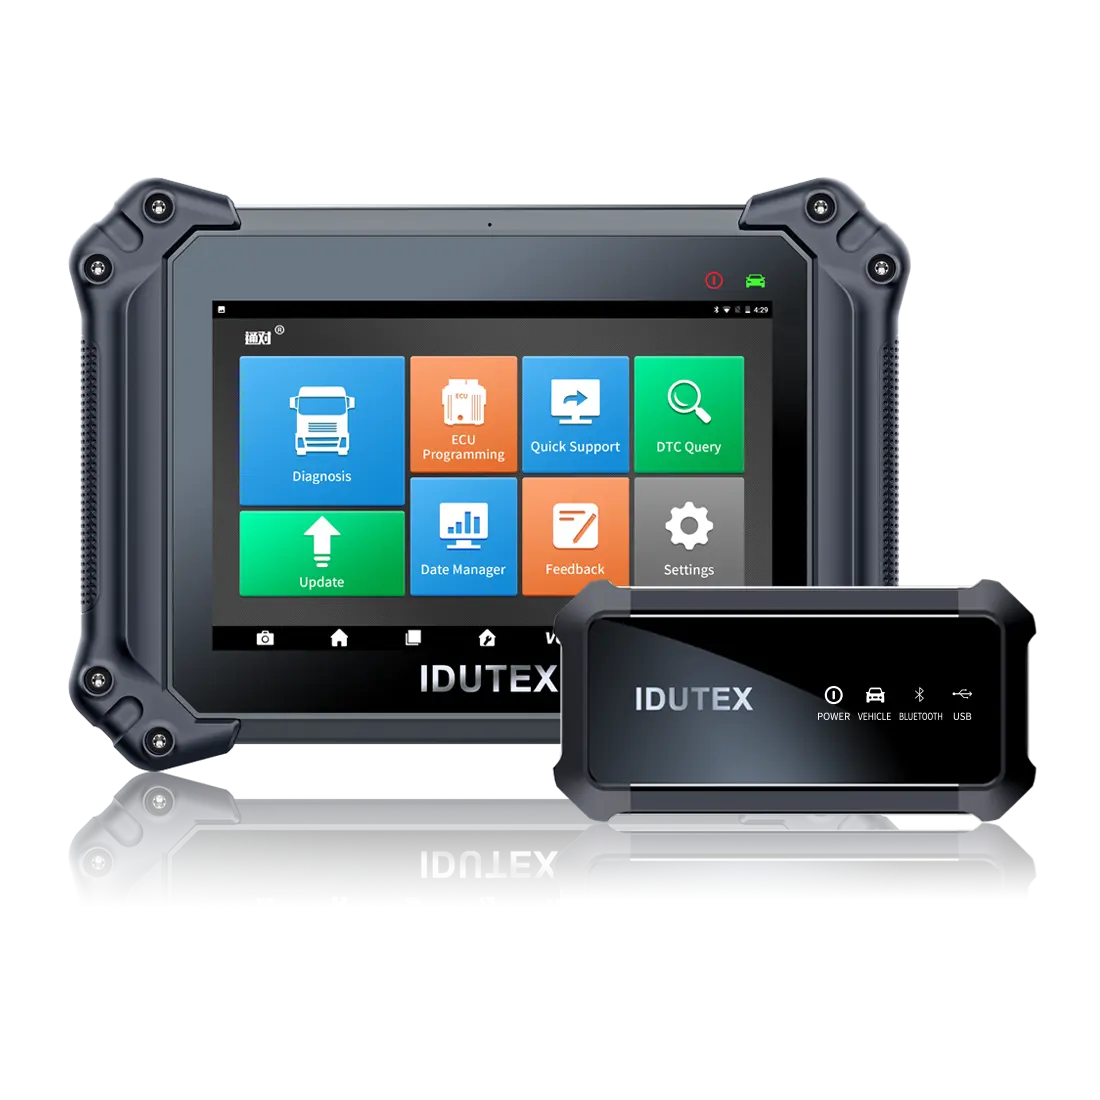 Idutex TS 810 pro automotive tools installed with truck heavy duty software for auto diagnostic